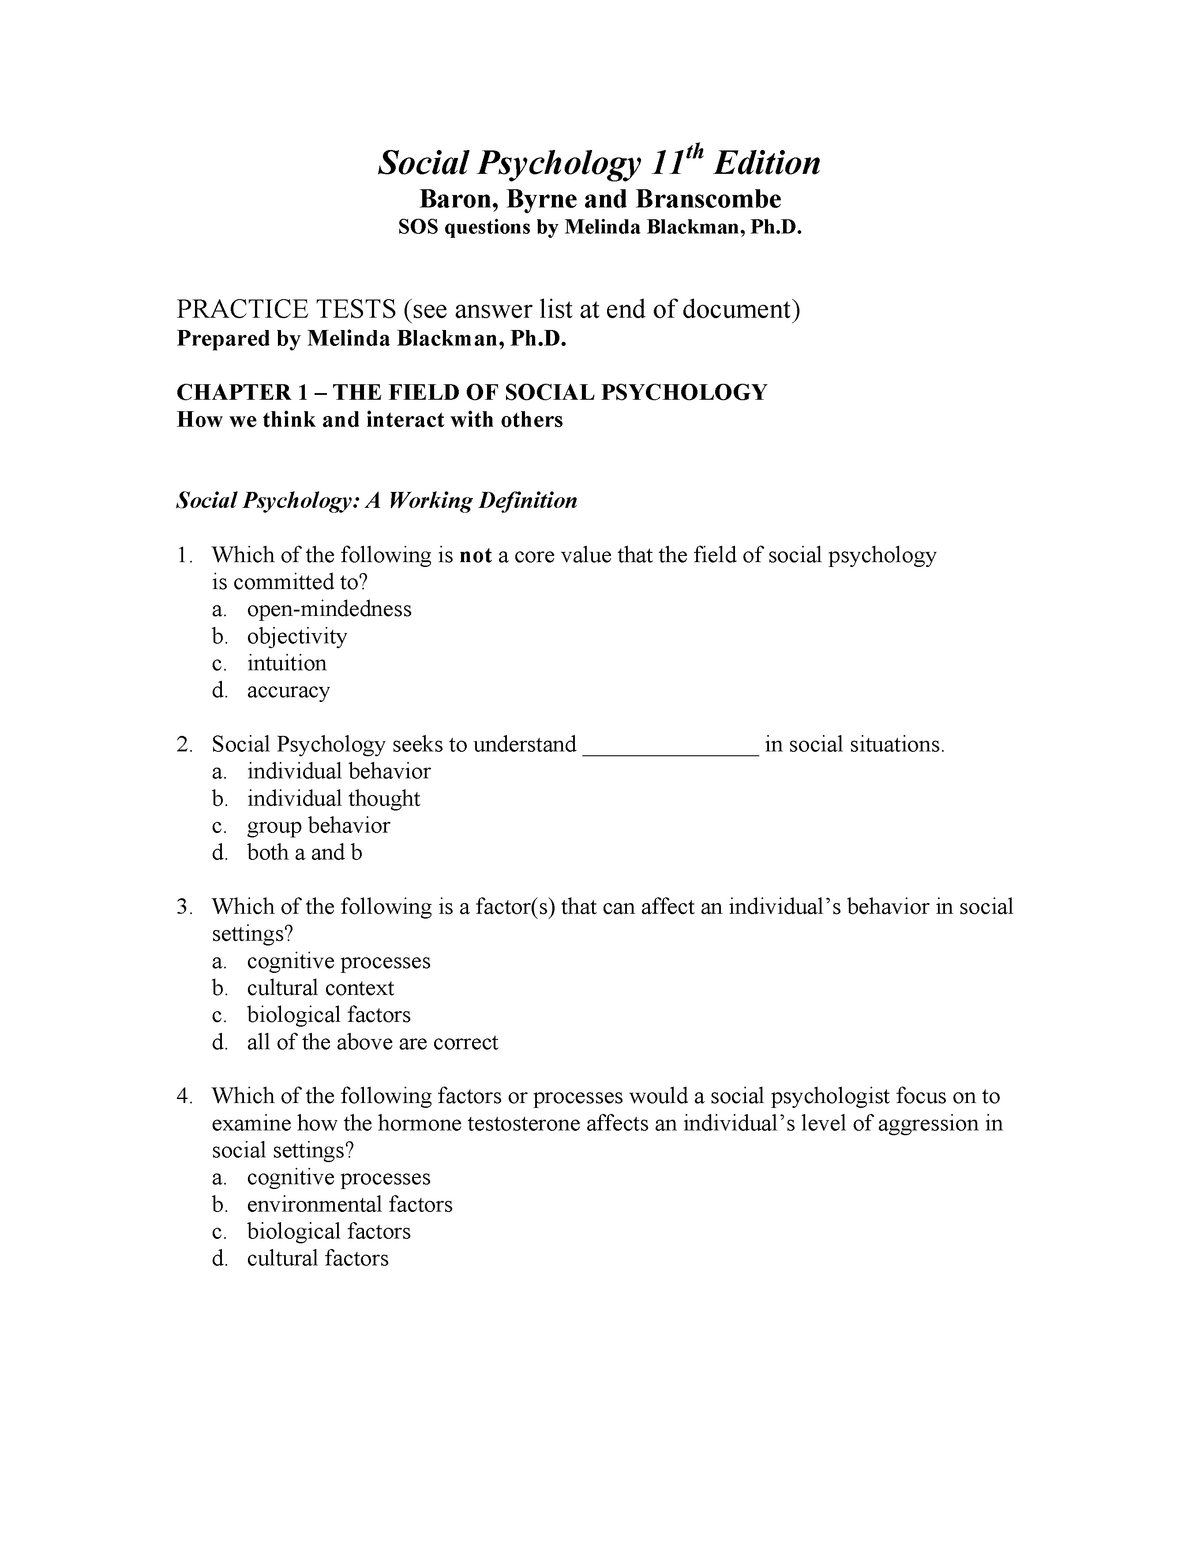 psychology research methods exam questions and answers